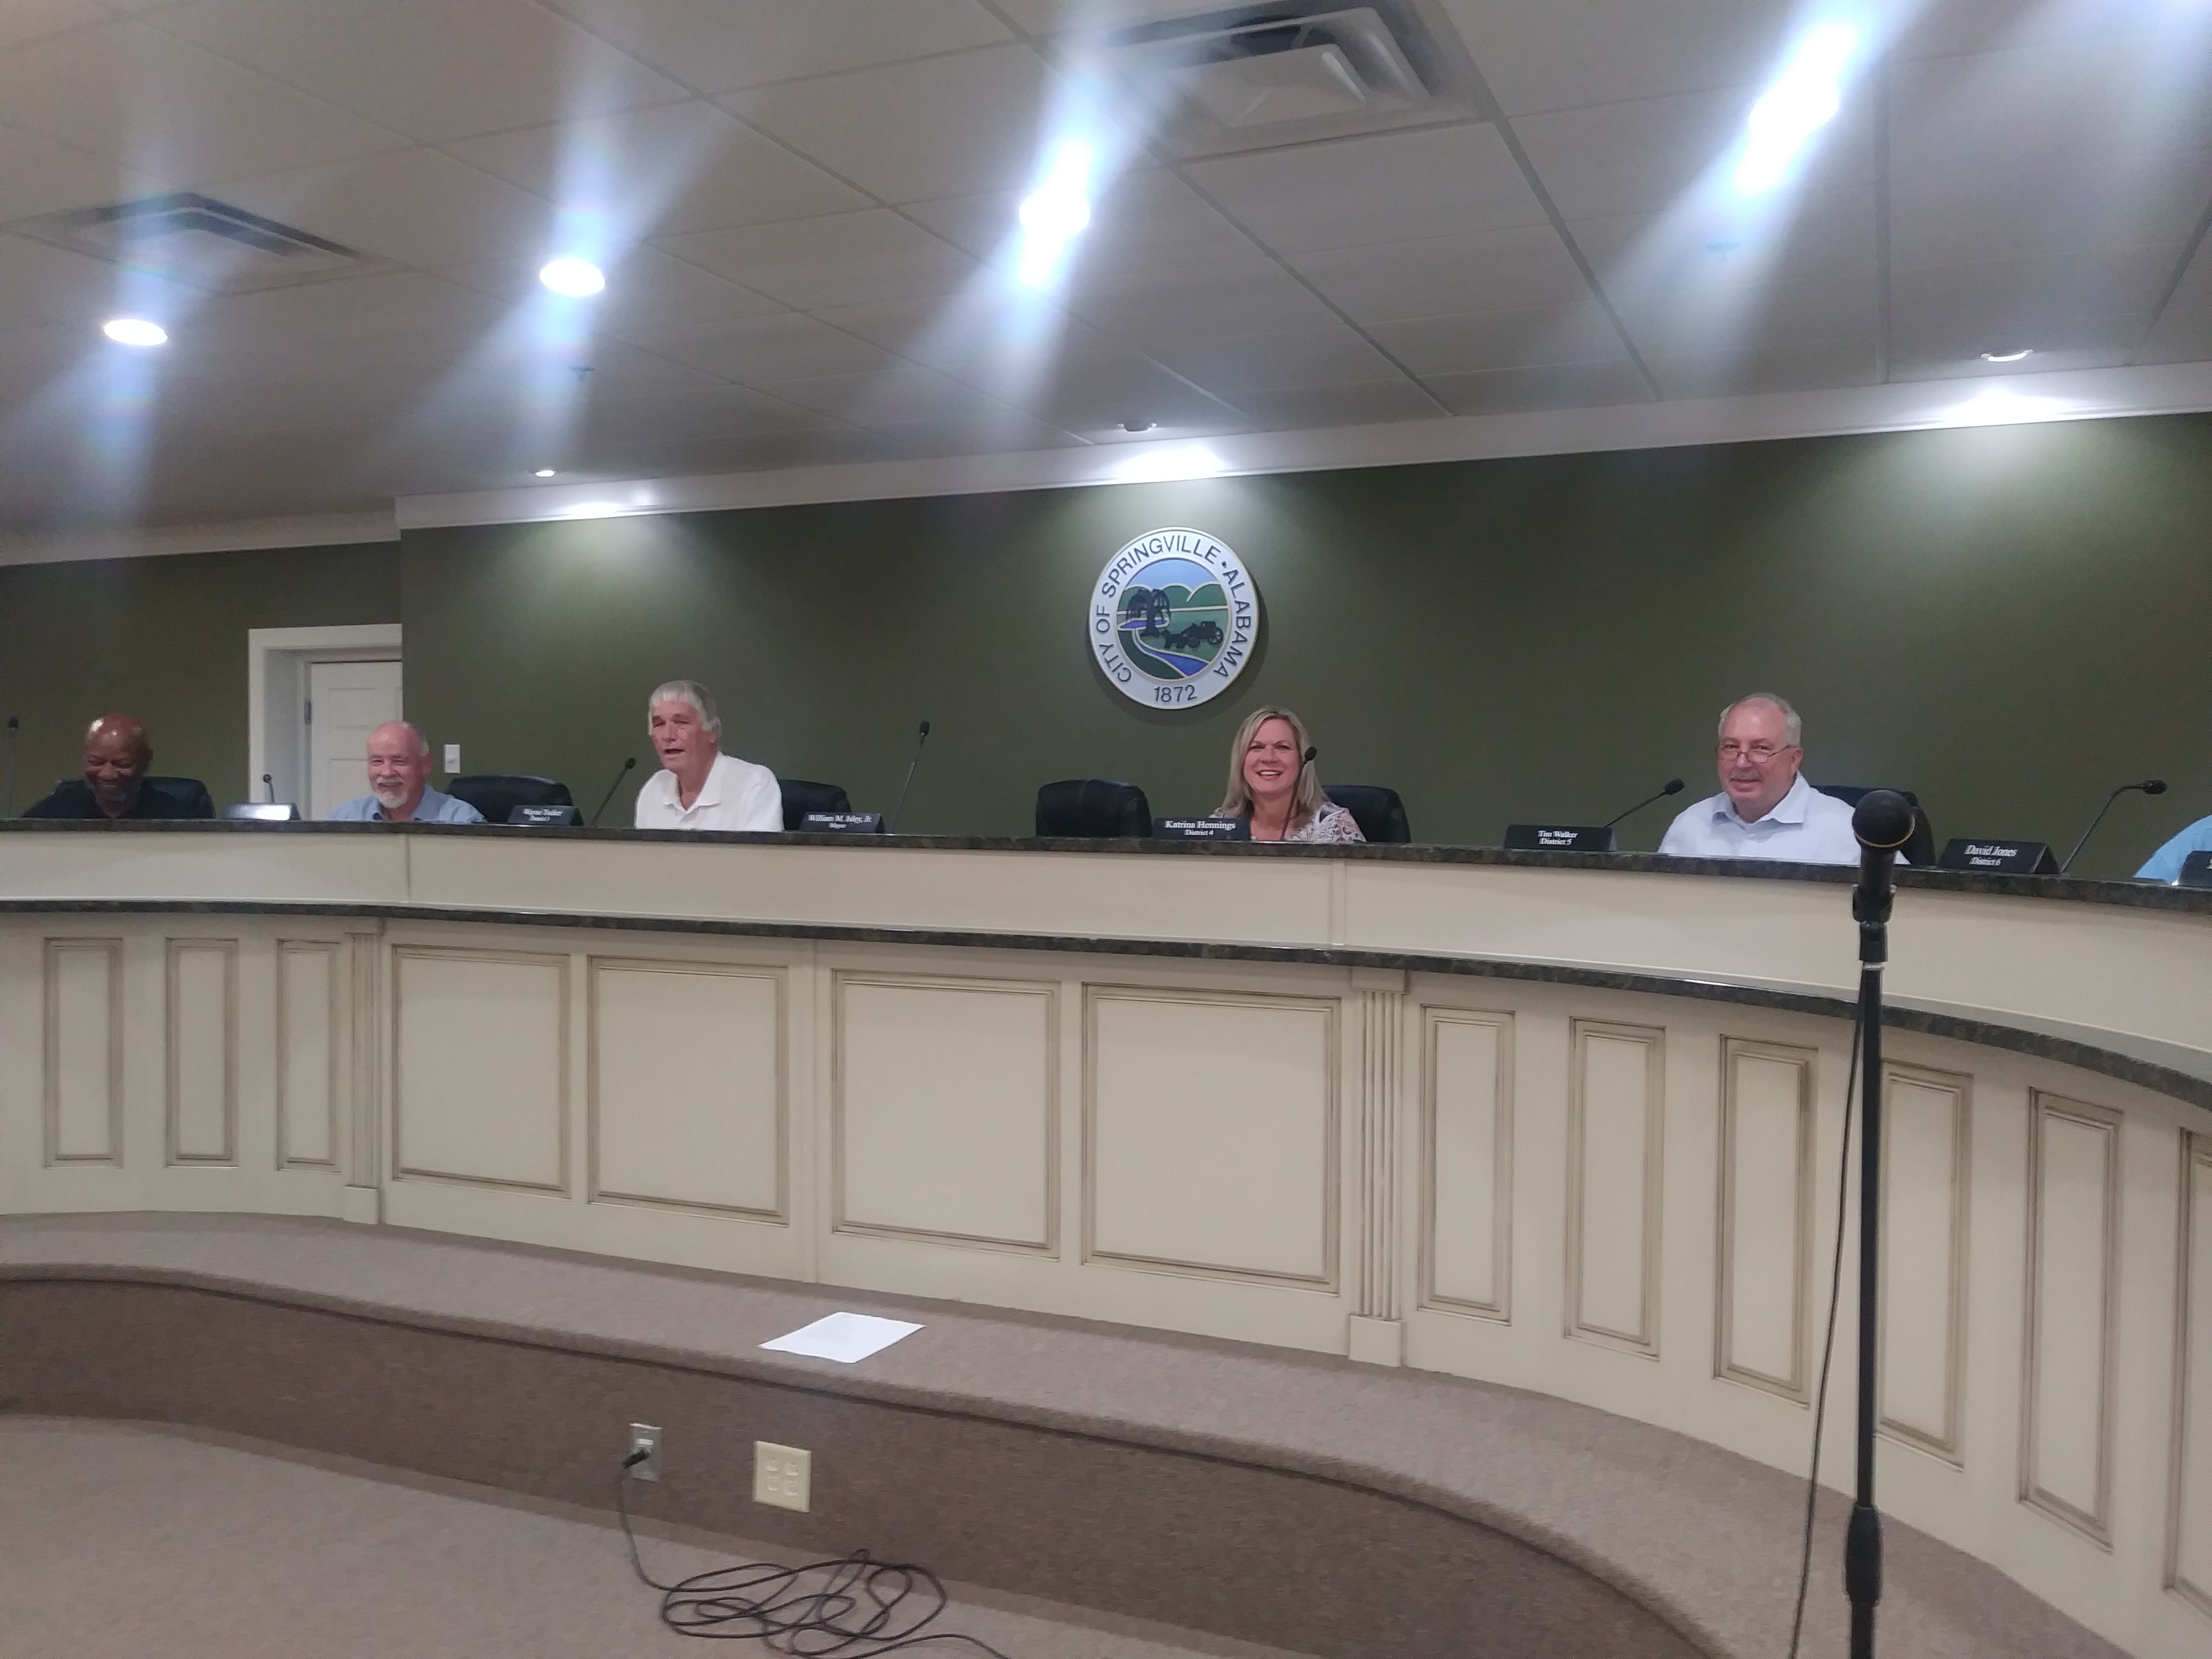 Springville to have a city council meeting on Monday